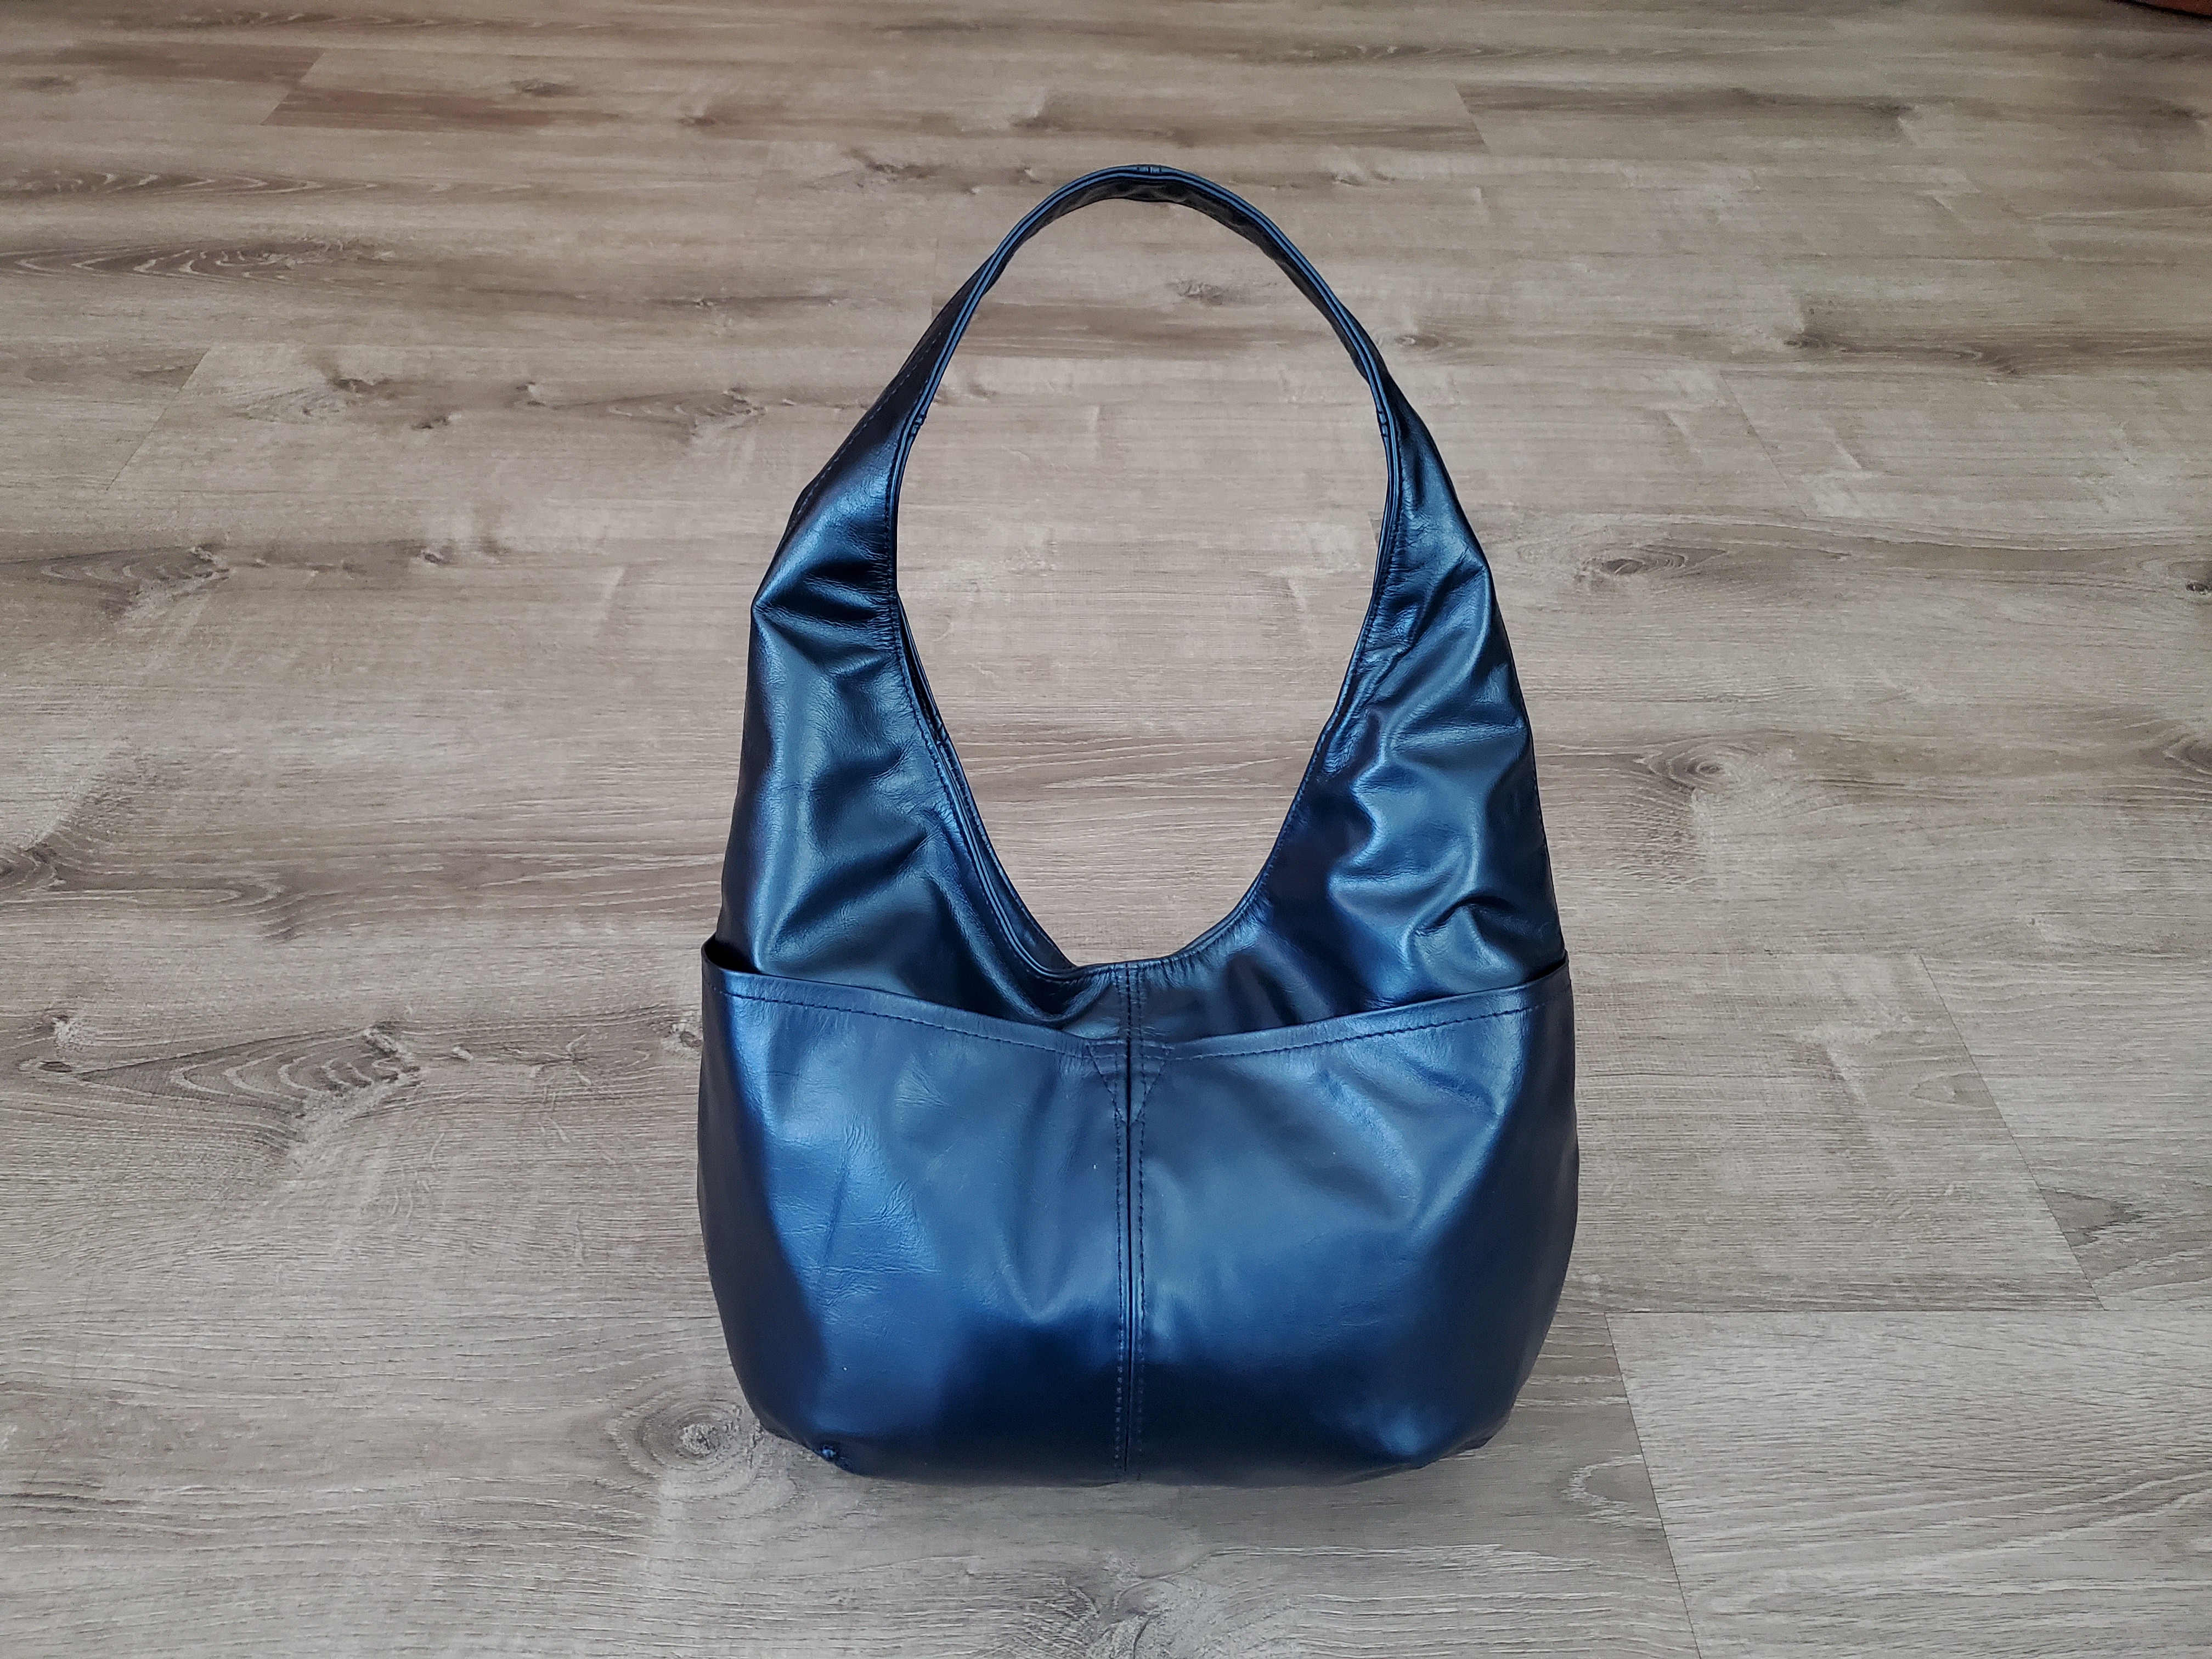 Shining Shaped Shoulder Bag in Blue Metallic Faux Leather, One Size - Ego